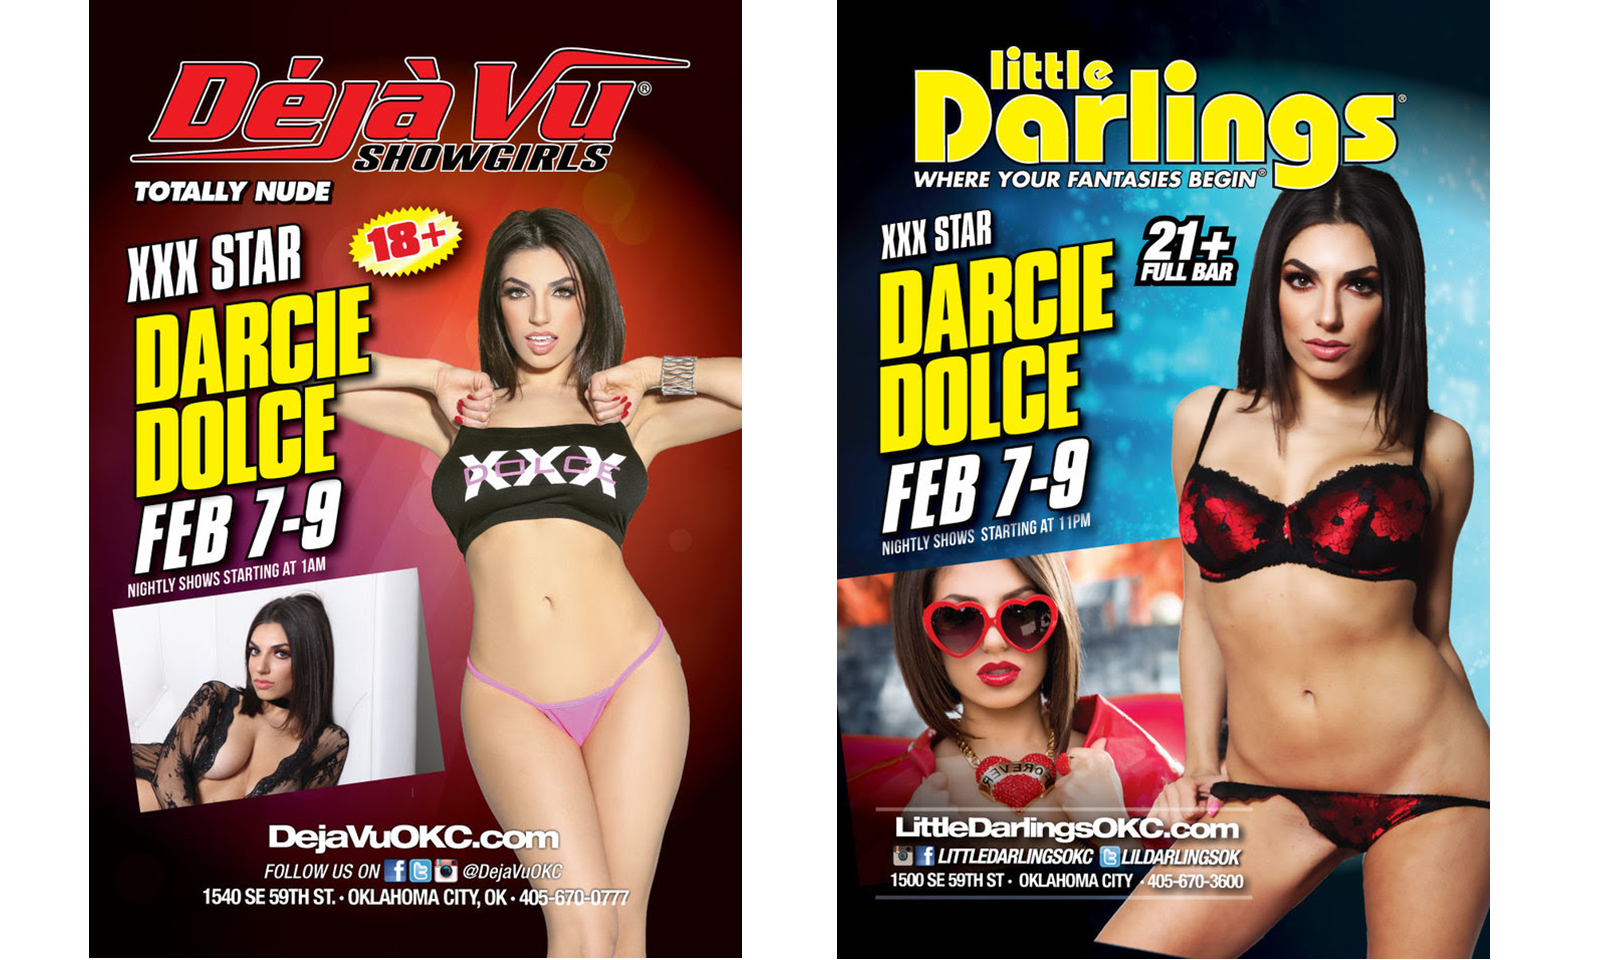 Darcie Dolce to Feature in Oklahoma City This Weekend